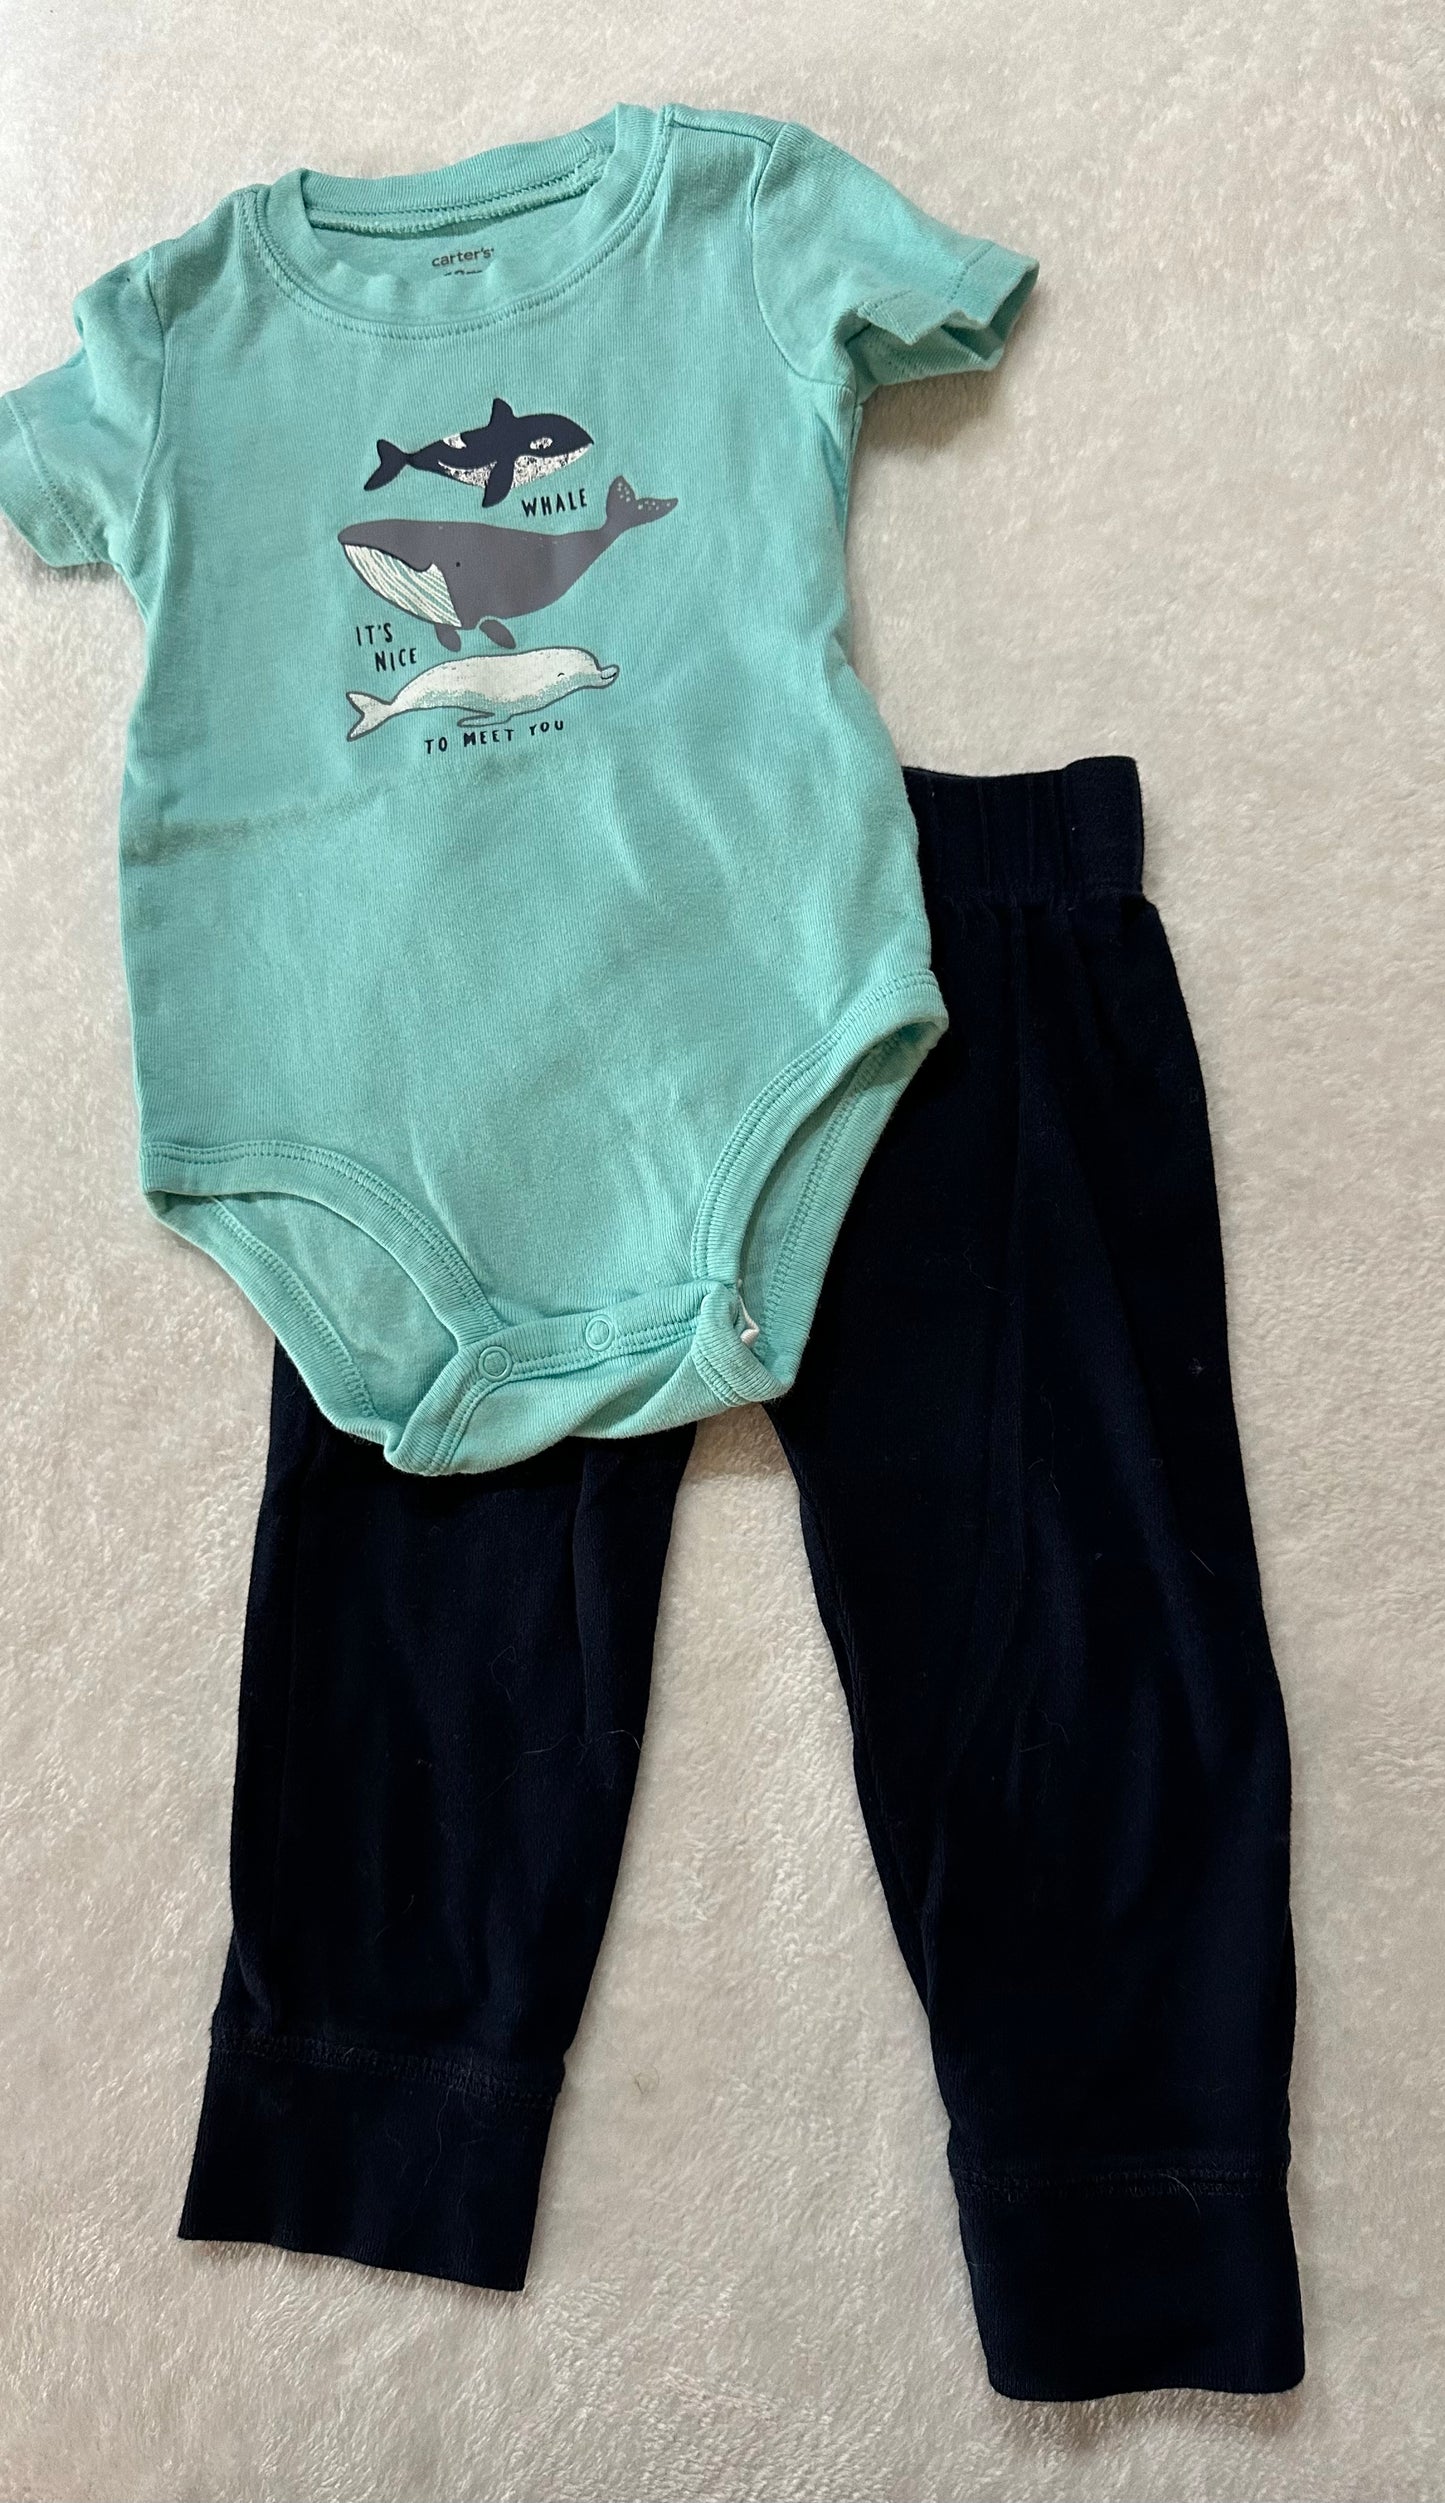 Boys 18 months Carters outfit